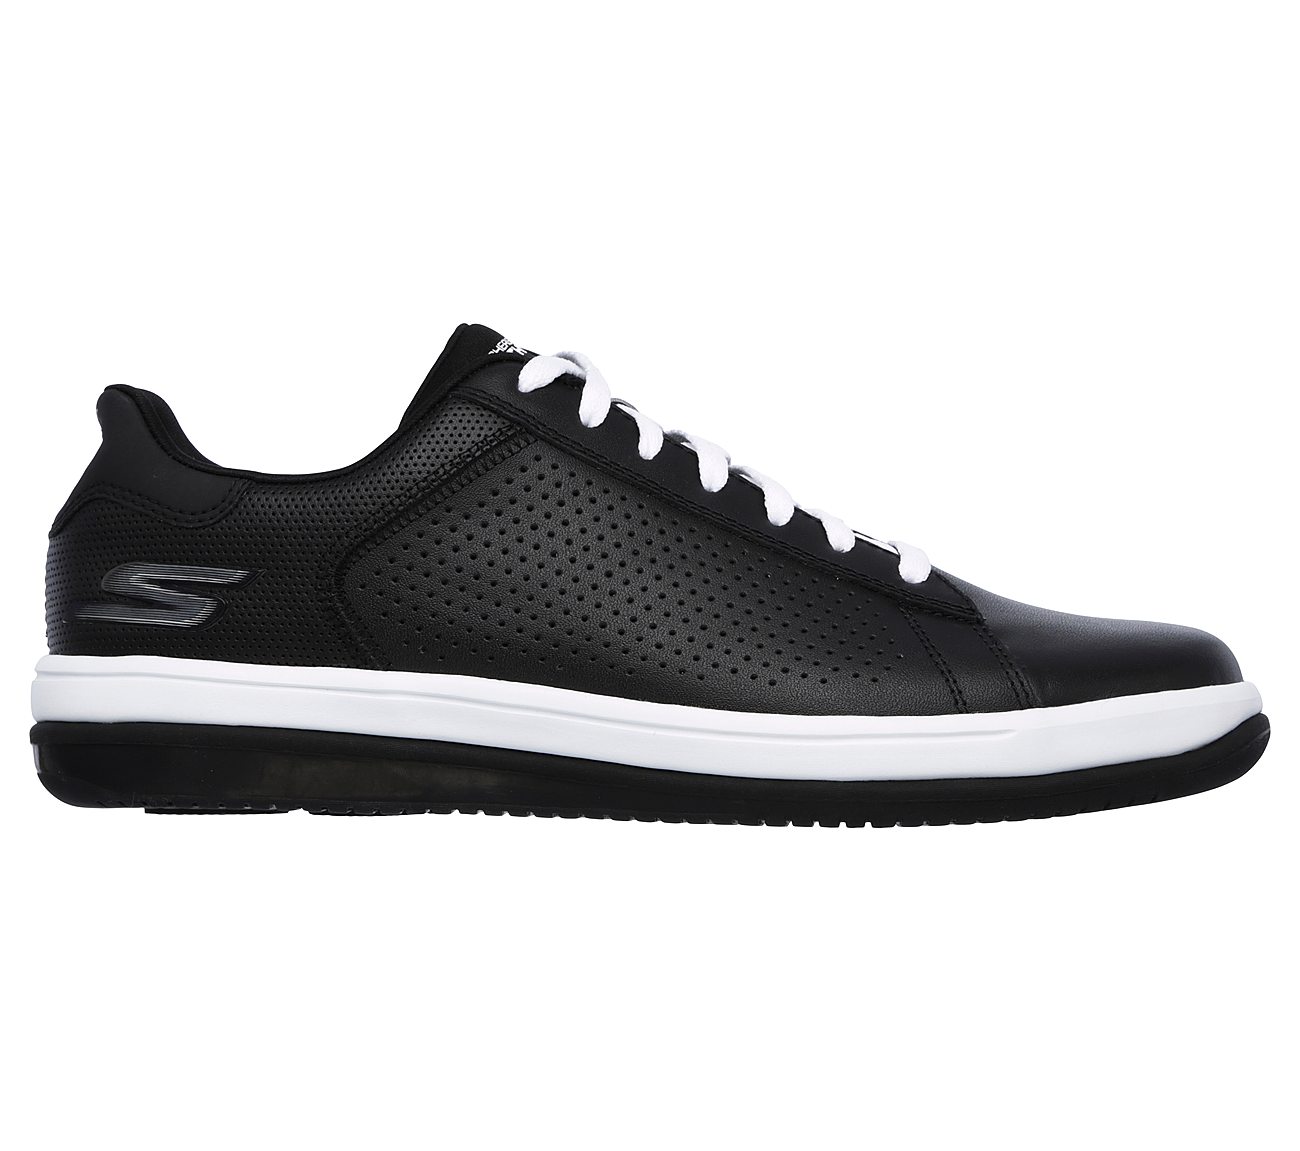 Raise Skechers On the GO Shoes